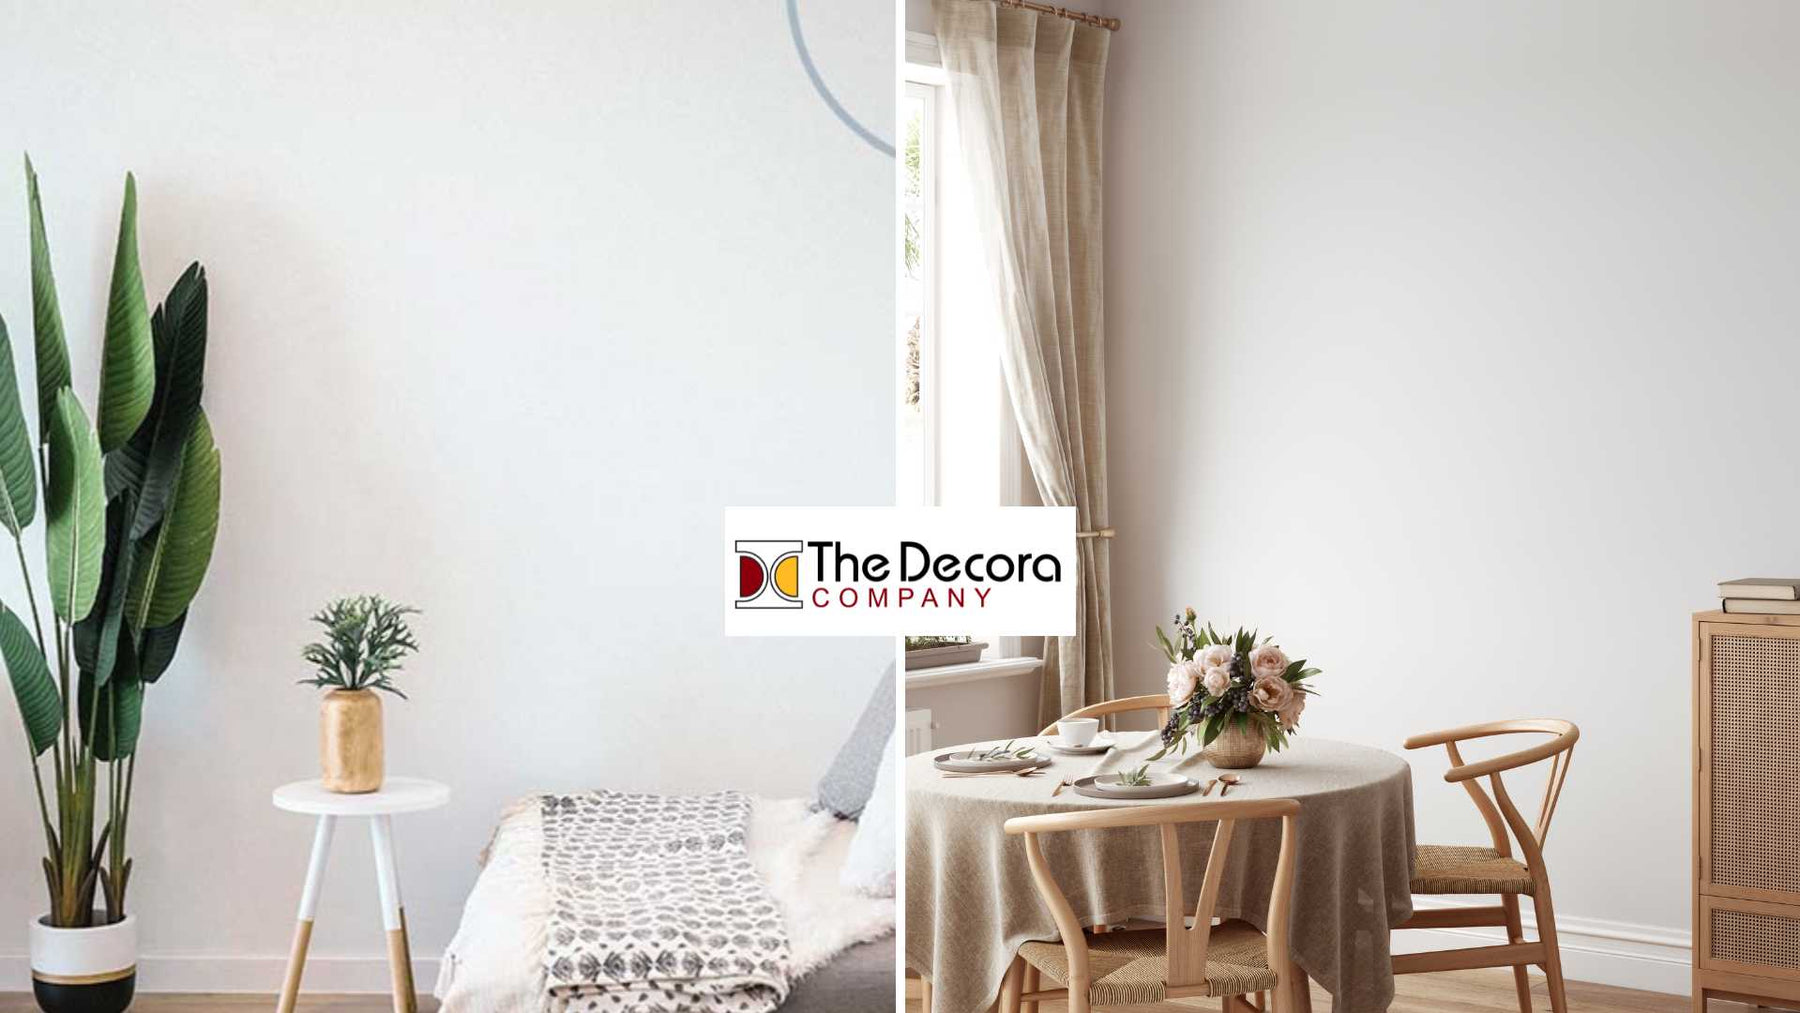 Why is it Ideal to Use Venetian Plaster for Your Walls The Decora Company